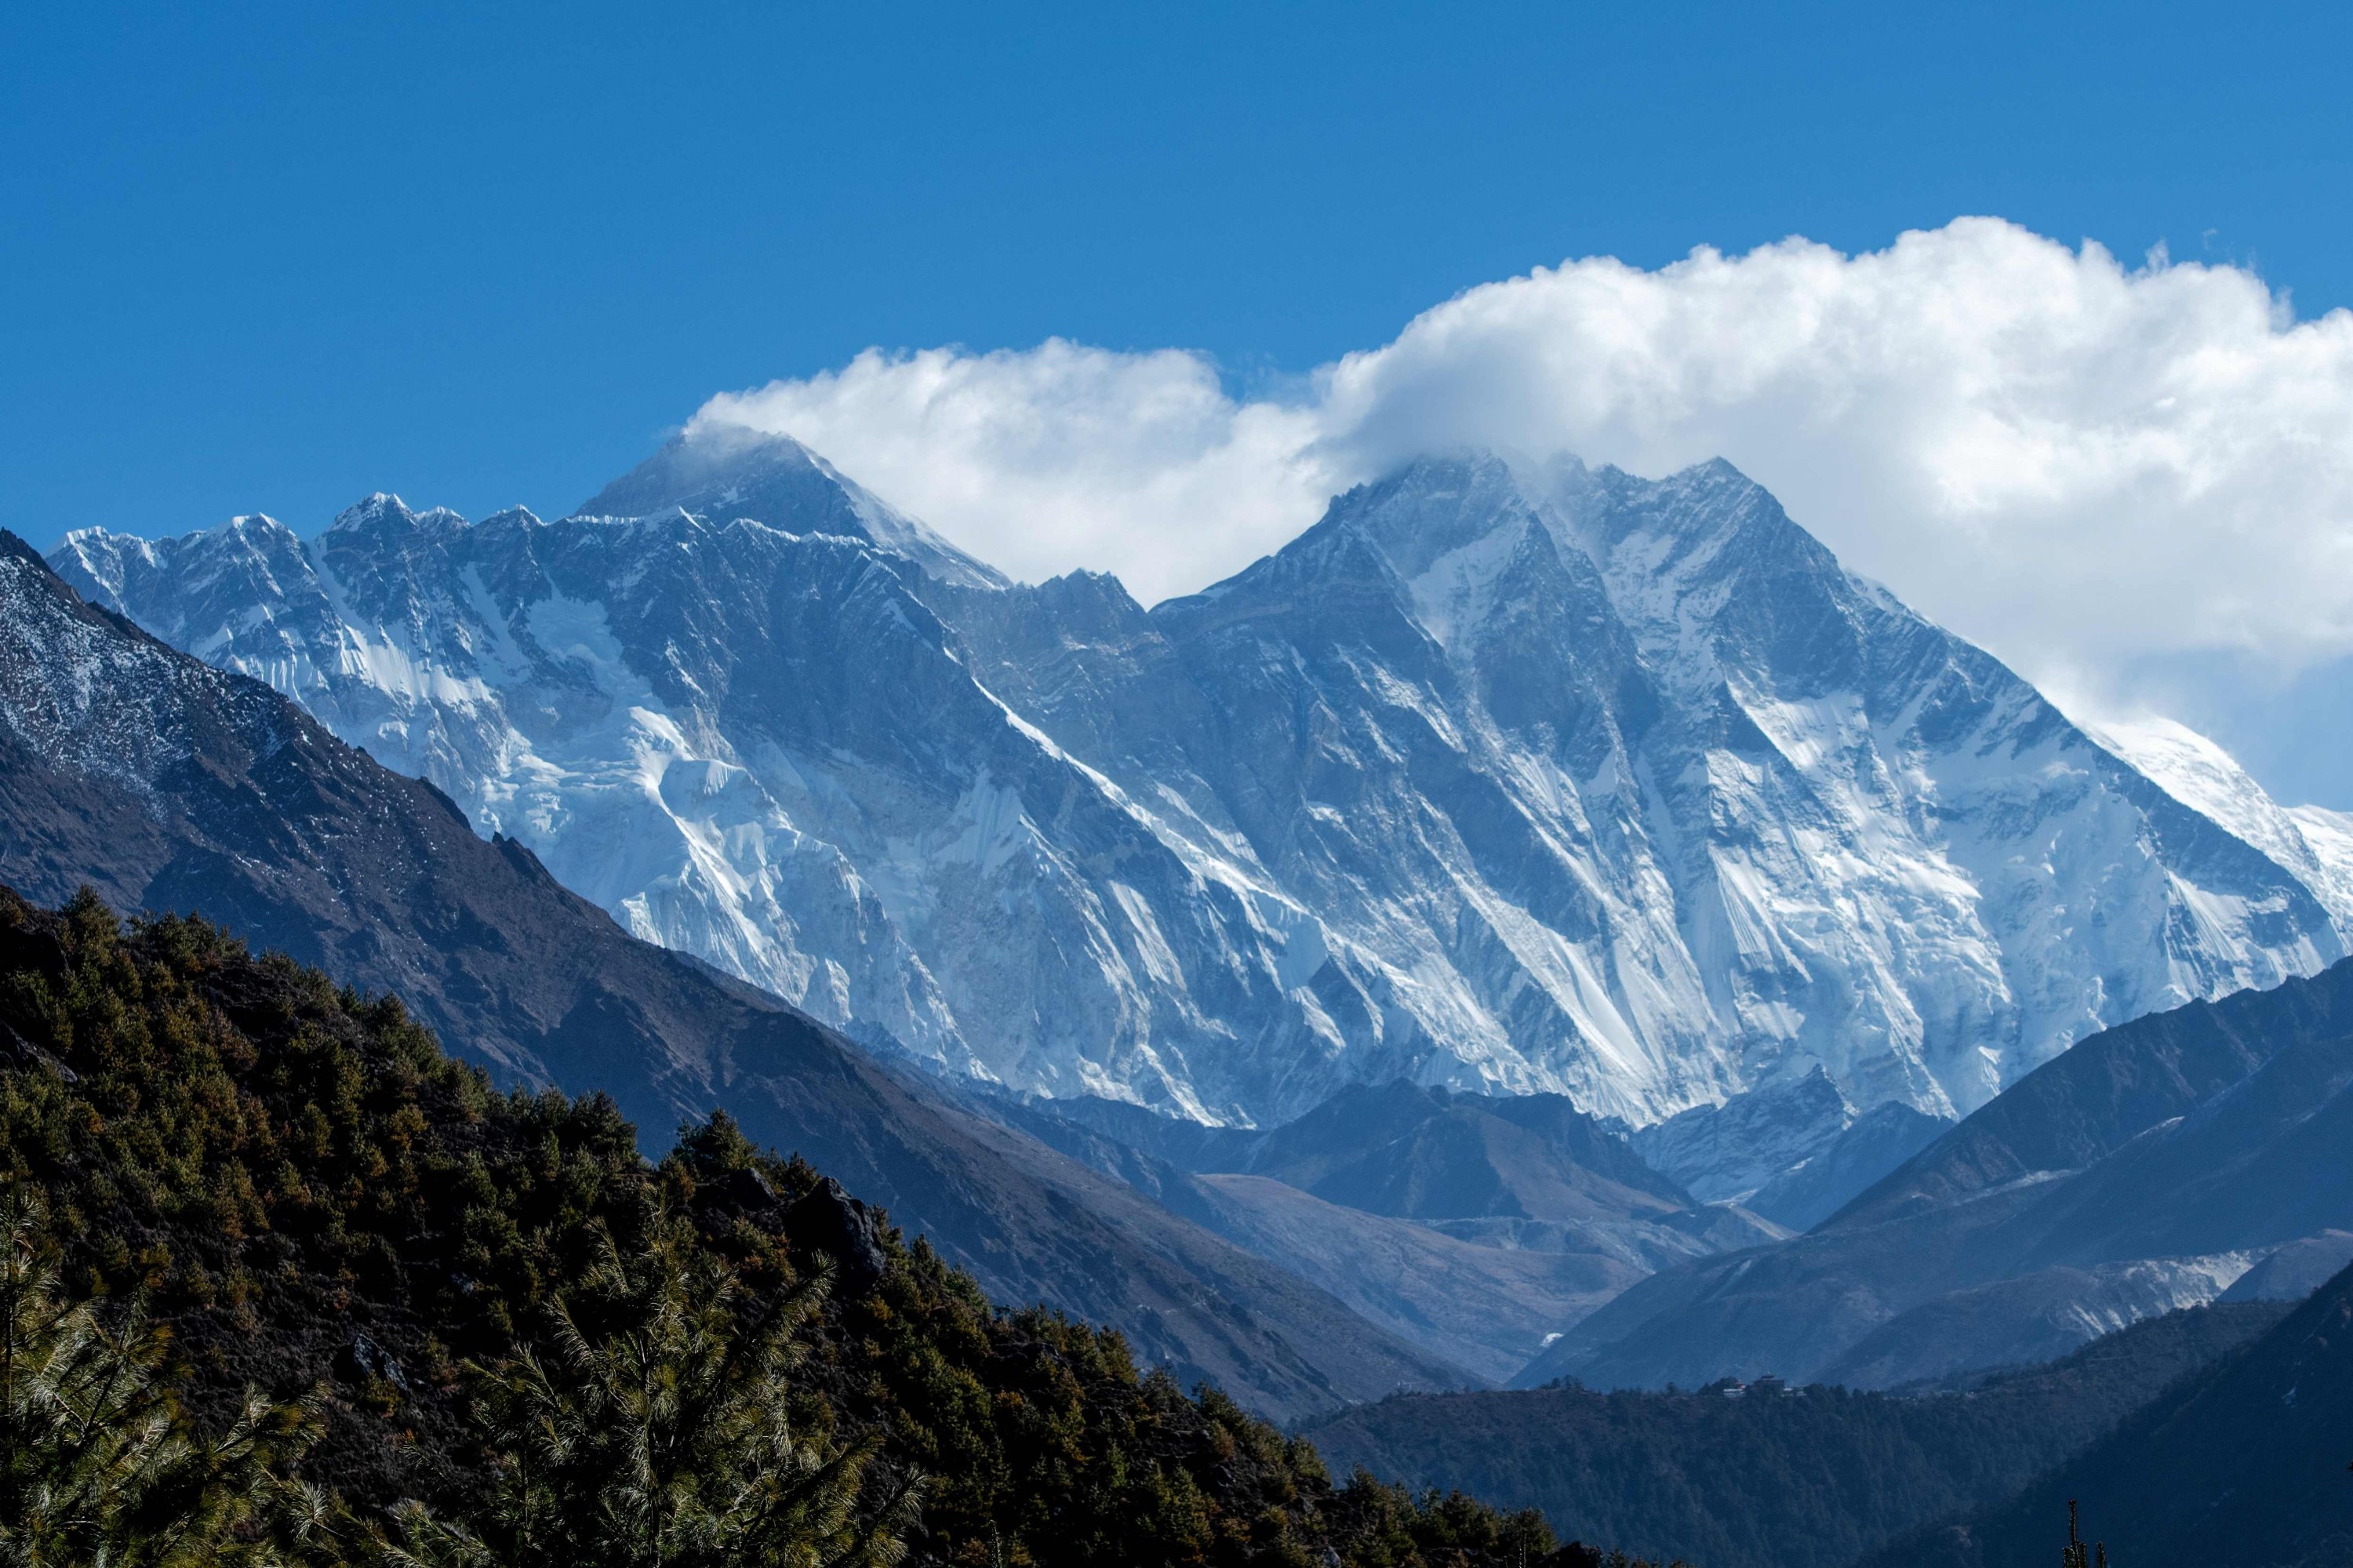 Oprechtheid wortel voordeel Growth spurt? Mount Everest's height revised to 8,849 meters, China and  Nepal announce | Daily Sabah